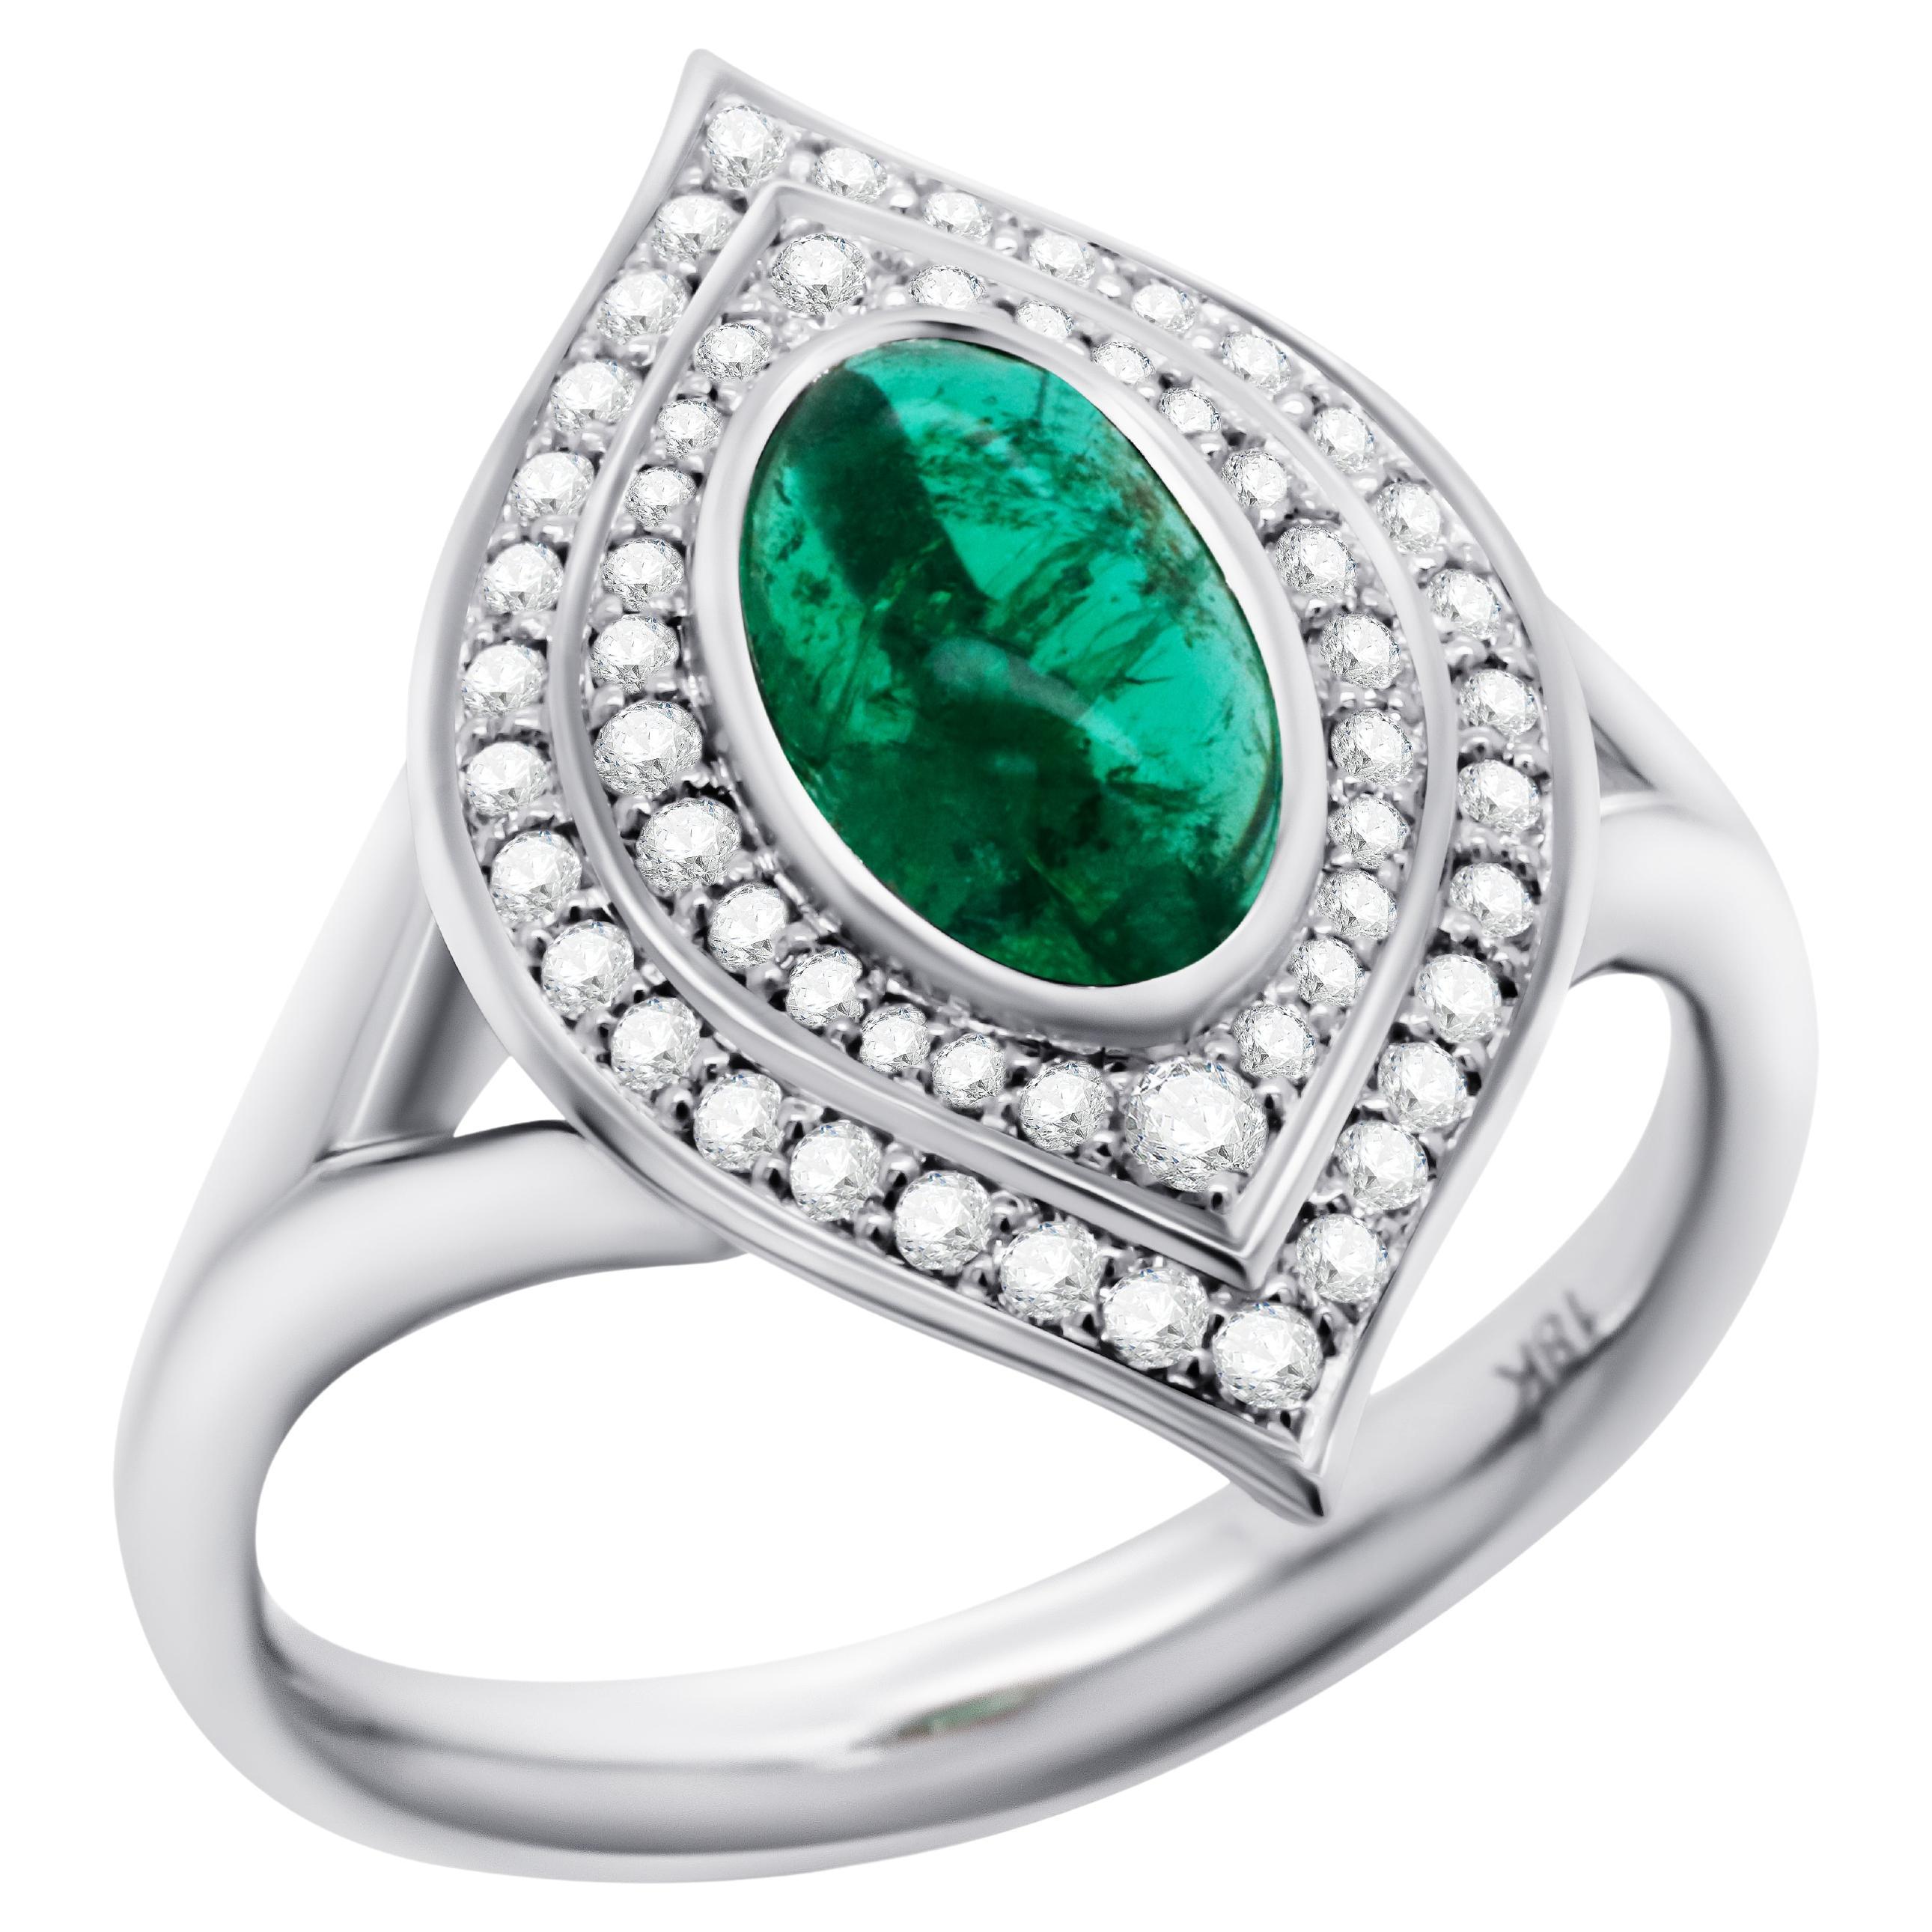 Vivid Green Cabochon Cut Russian Emerald 18K Gold Ring ICL Certified For Sale